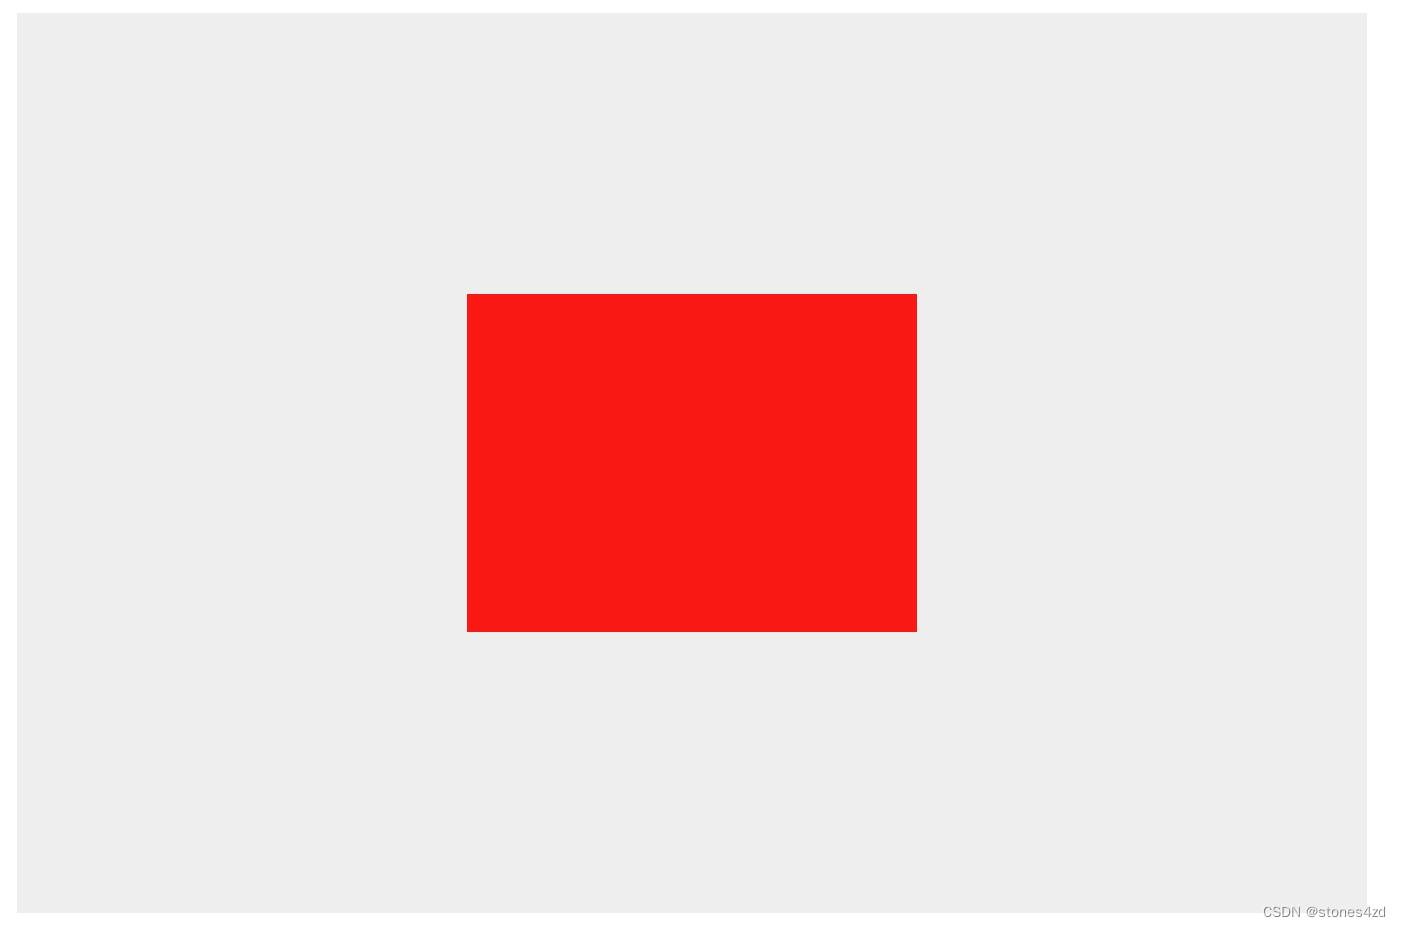 CSS3技巧36：让内容<span style='color:red;'>垂直</span><span style='color:red;'>居</span><span style='color:red;'>中</span><span style='color:red;'>的</span>三<span style='color:red;'>种</span><span style='color:red;'>方式</span>